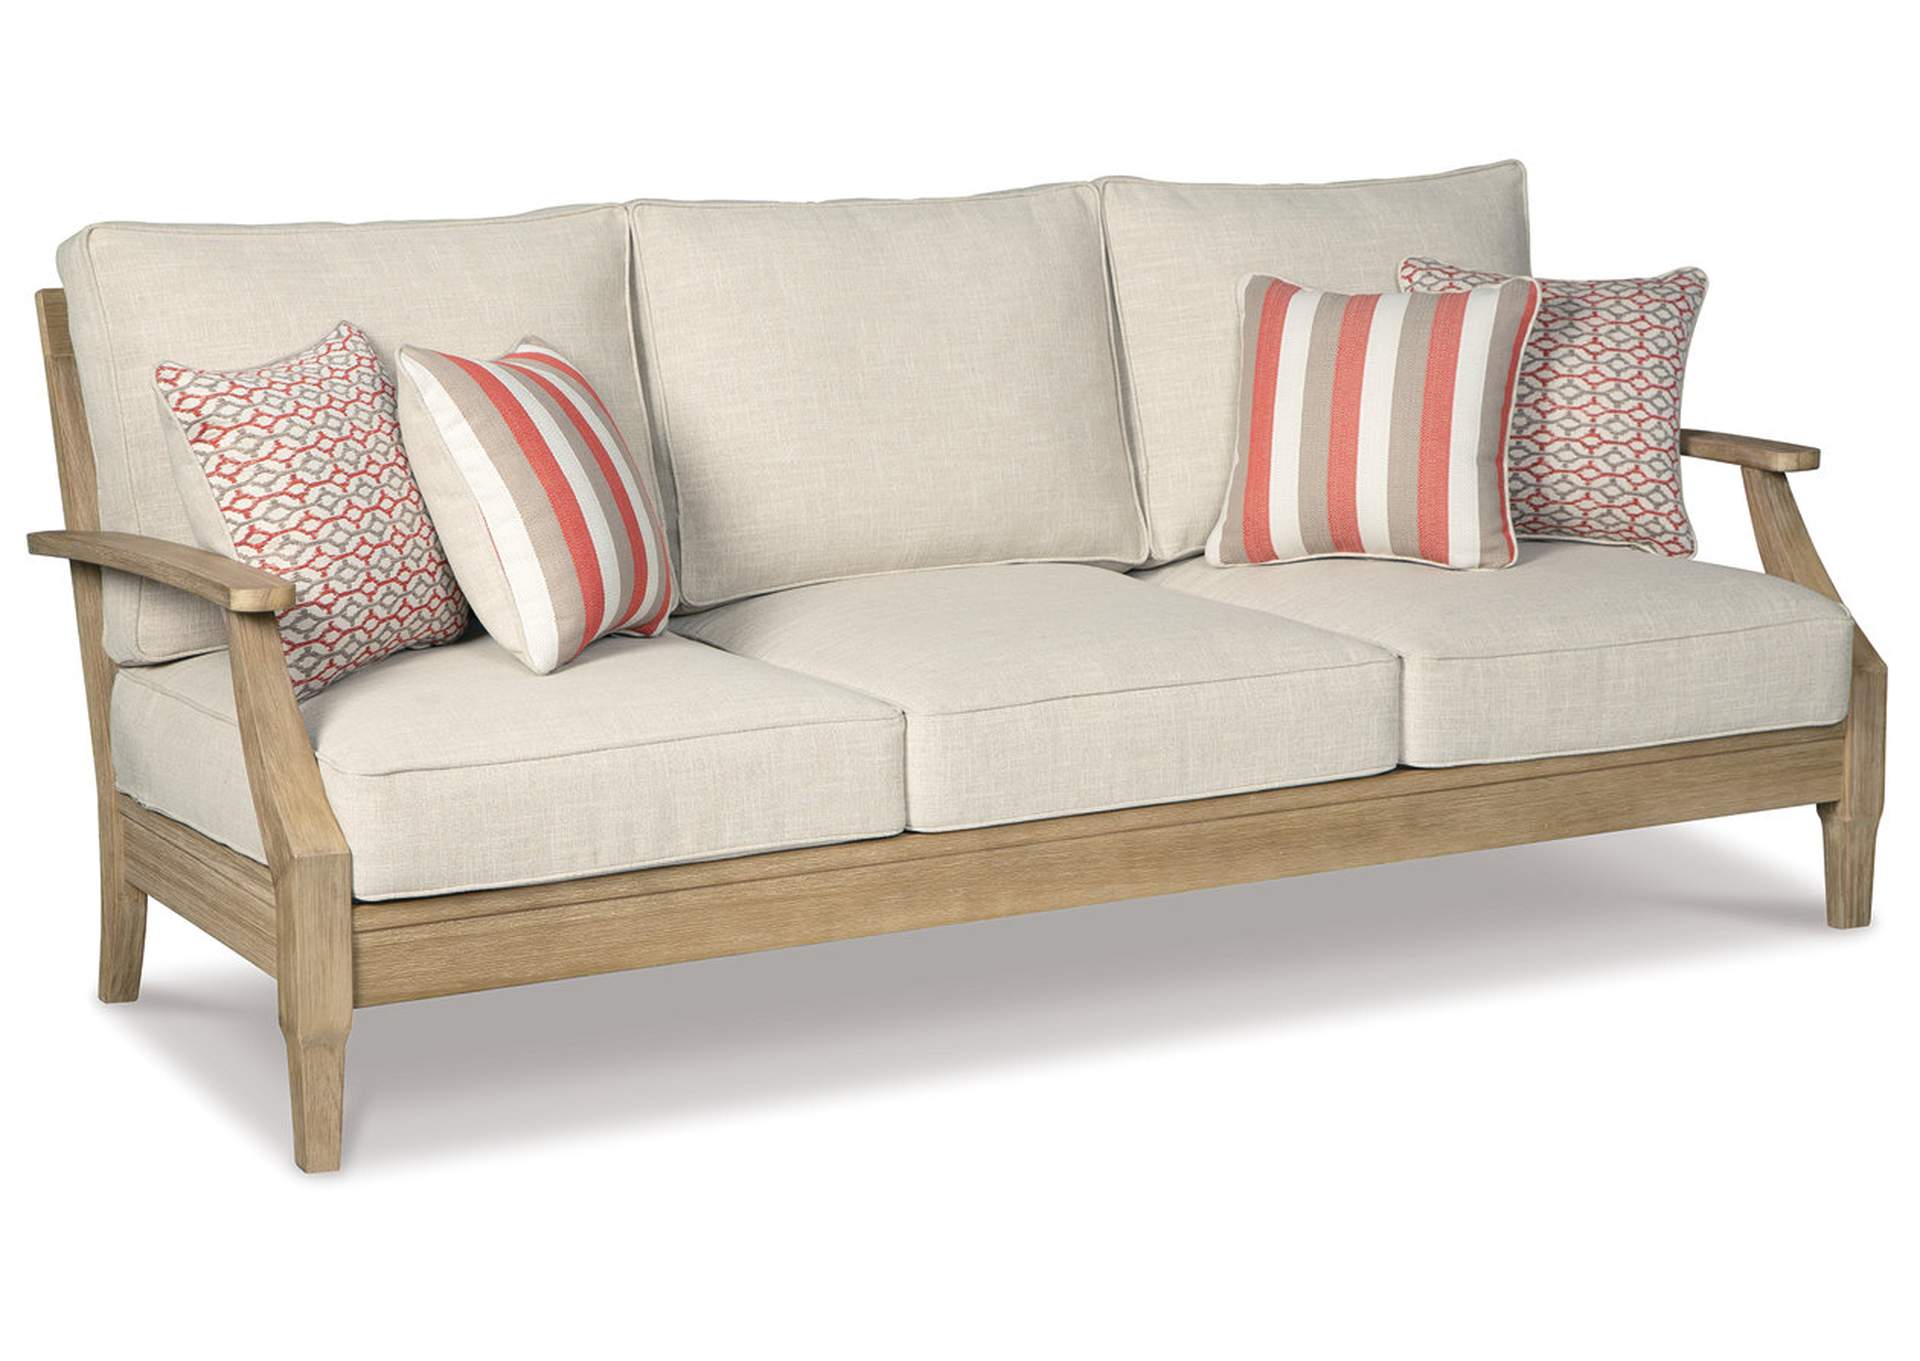 Clare View Outdoor Sofa with Lounge Chair,Outdoor By Ashley